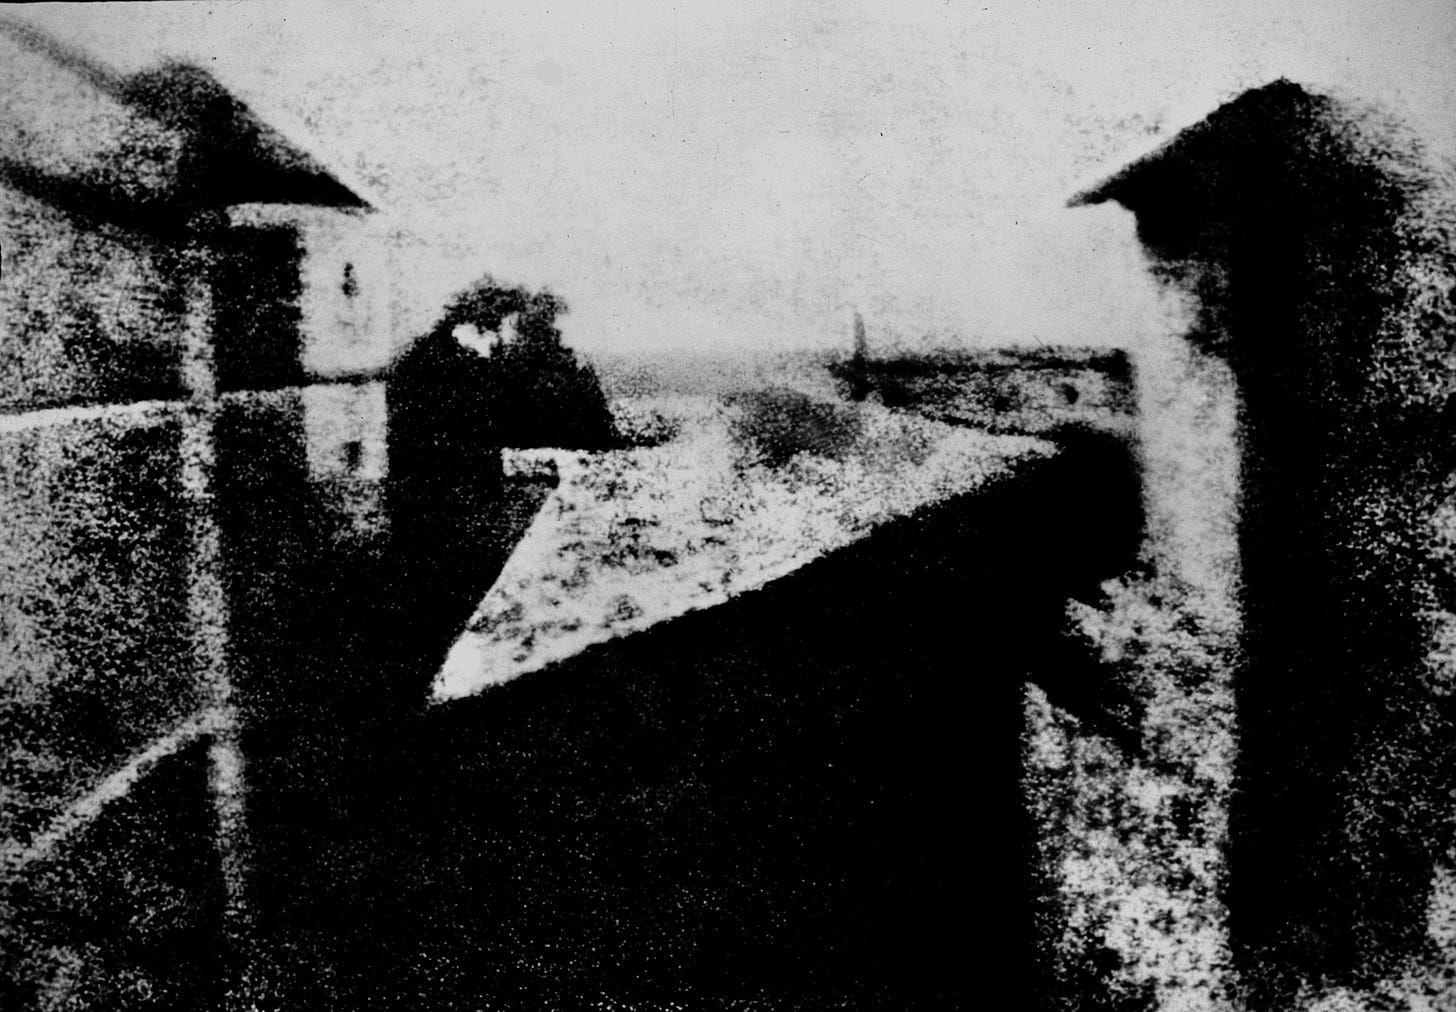 View from the Window at Le Gras, Nicéphore Niépce